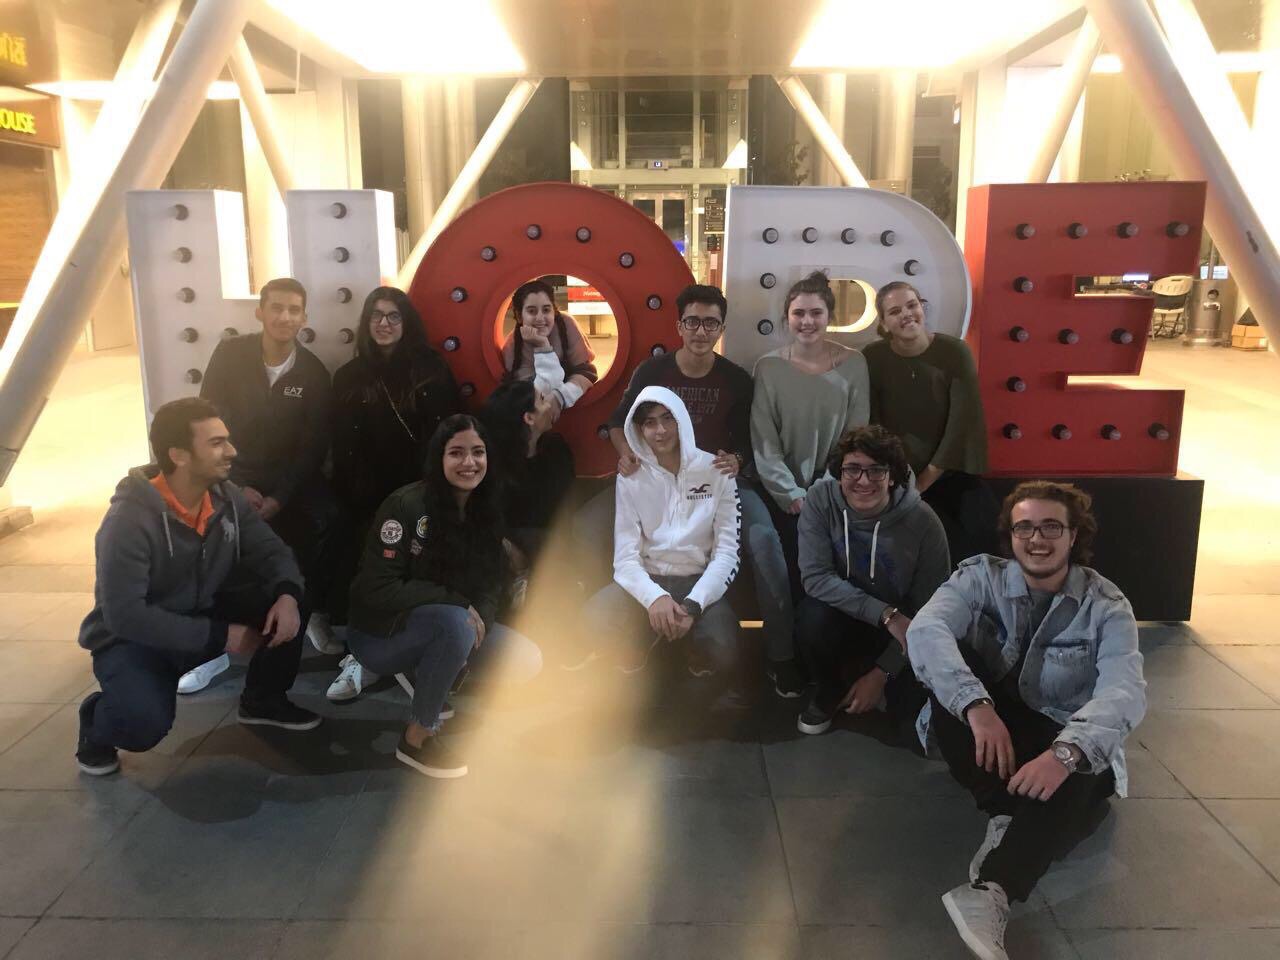 Phoebe Rossman poses with a group of friends in front of large 3-D letters that spell HOPE.